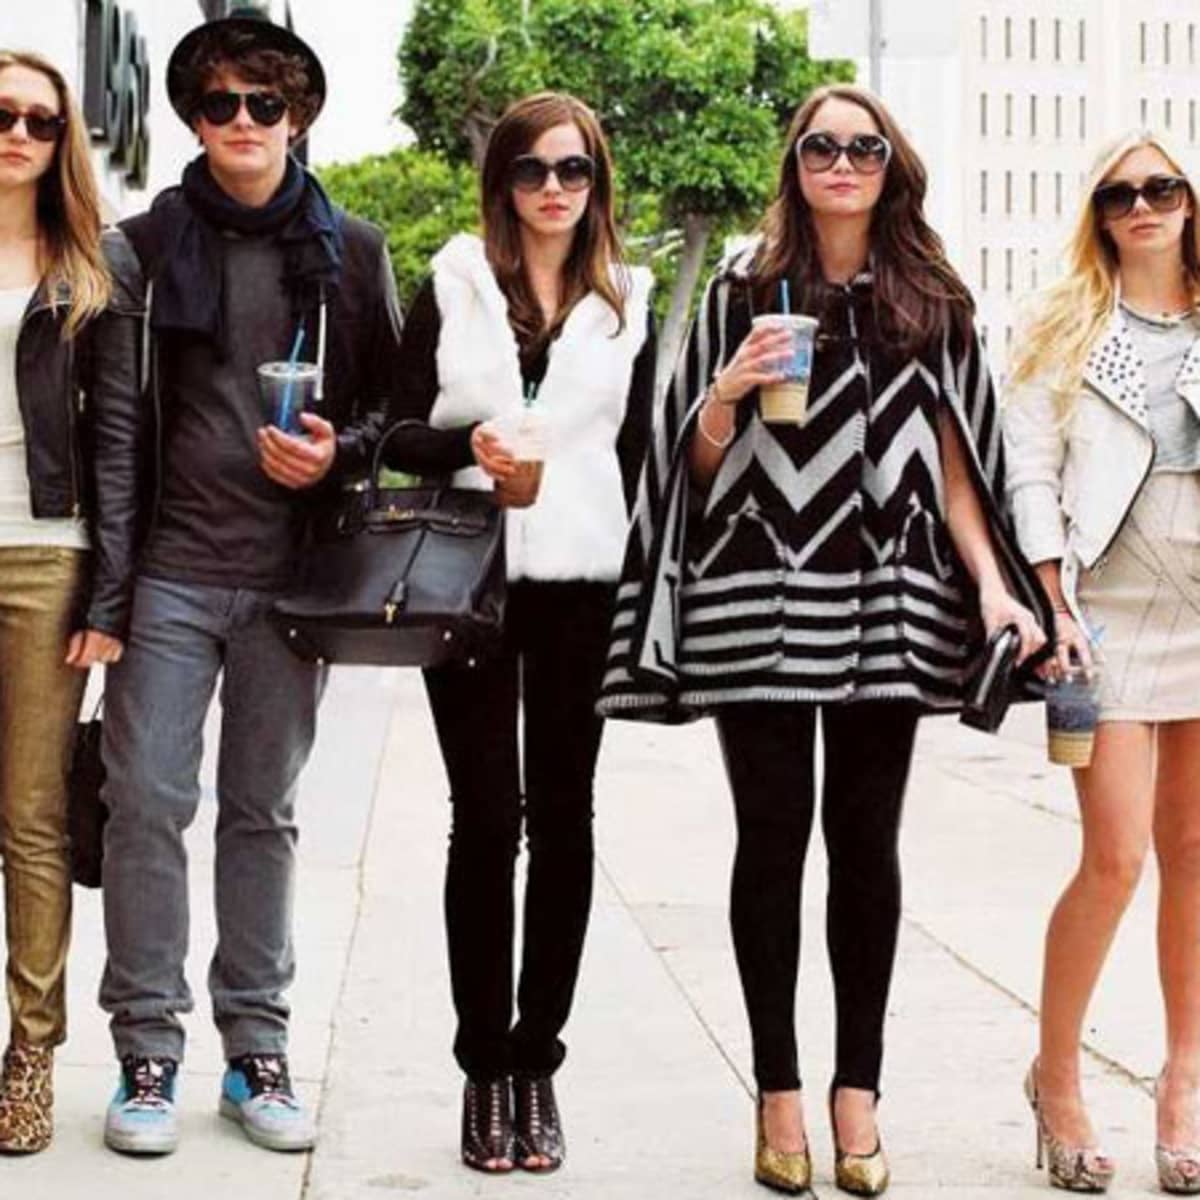 Movie Review] The Bling Ring (2013) - The Grand Shuckett